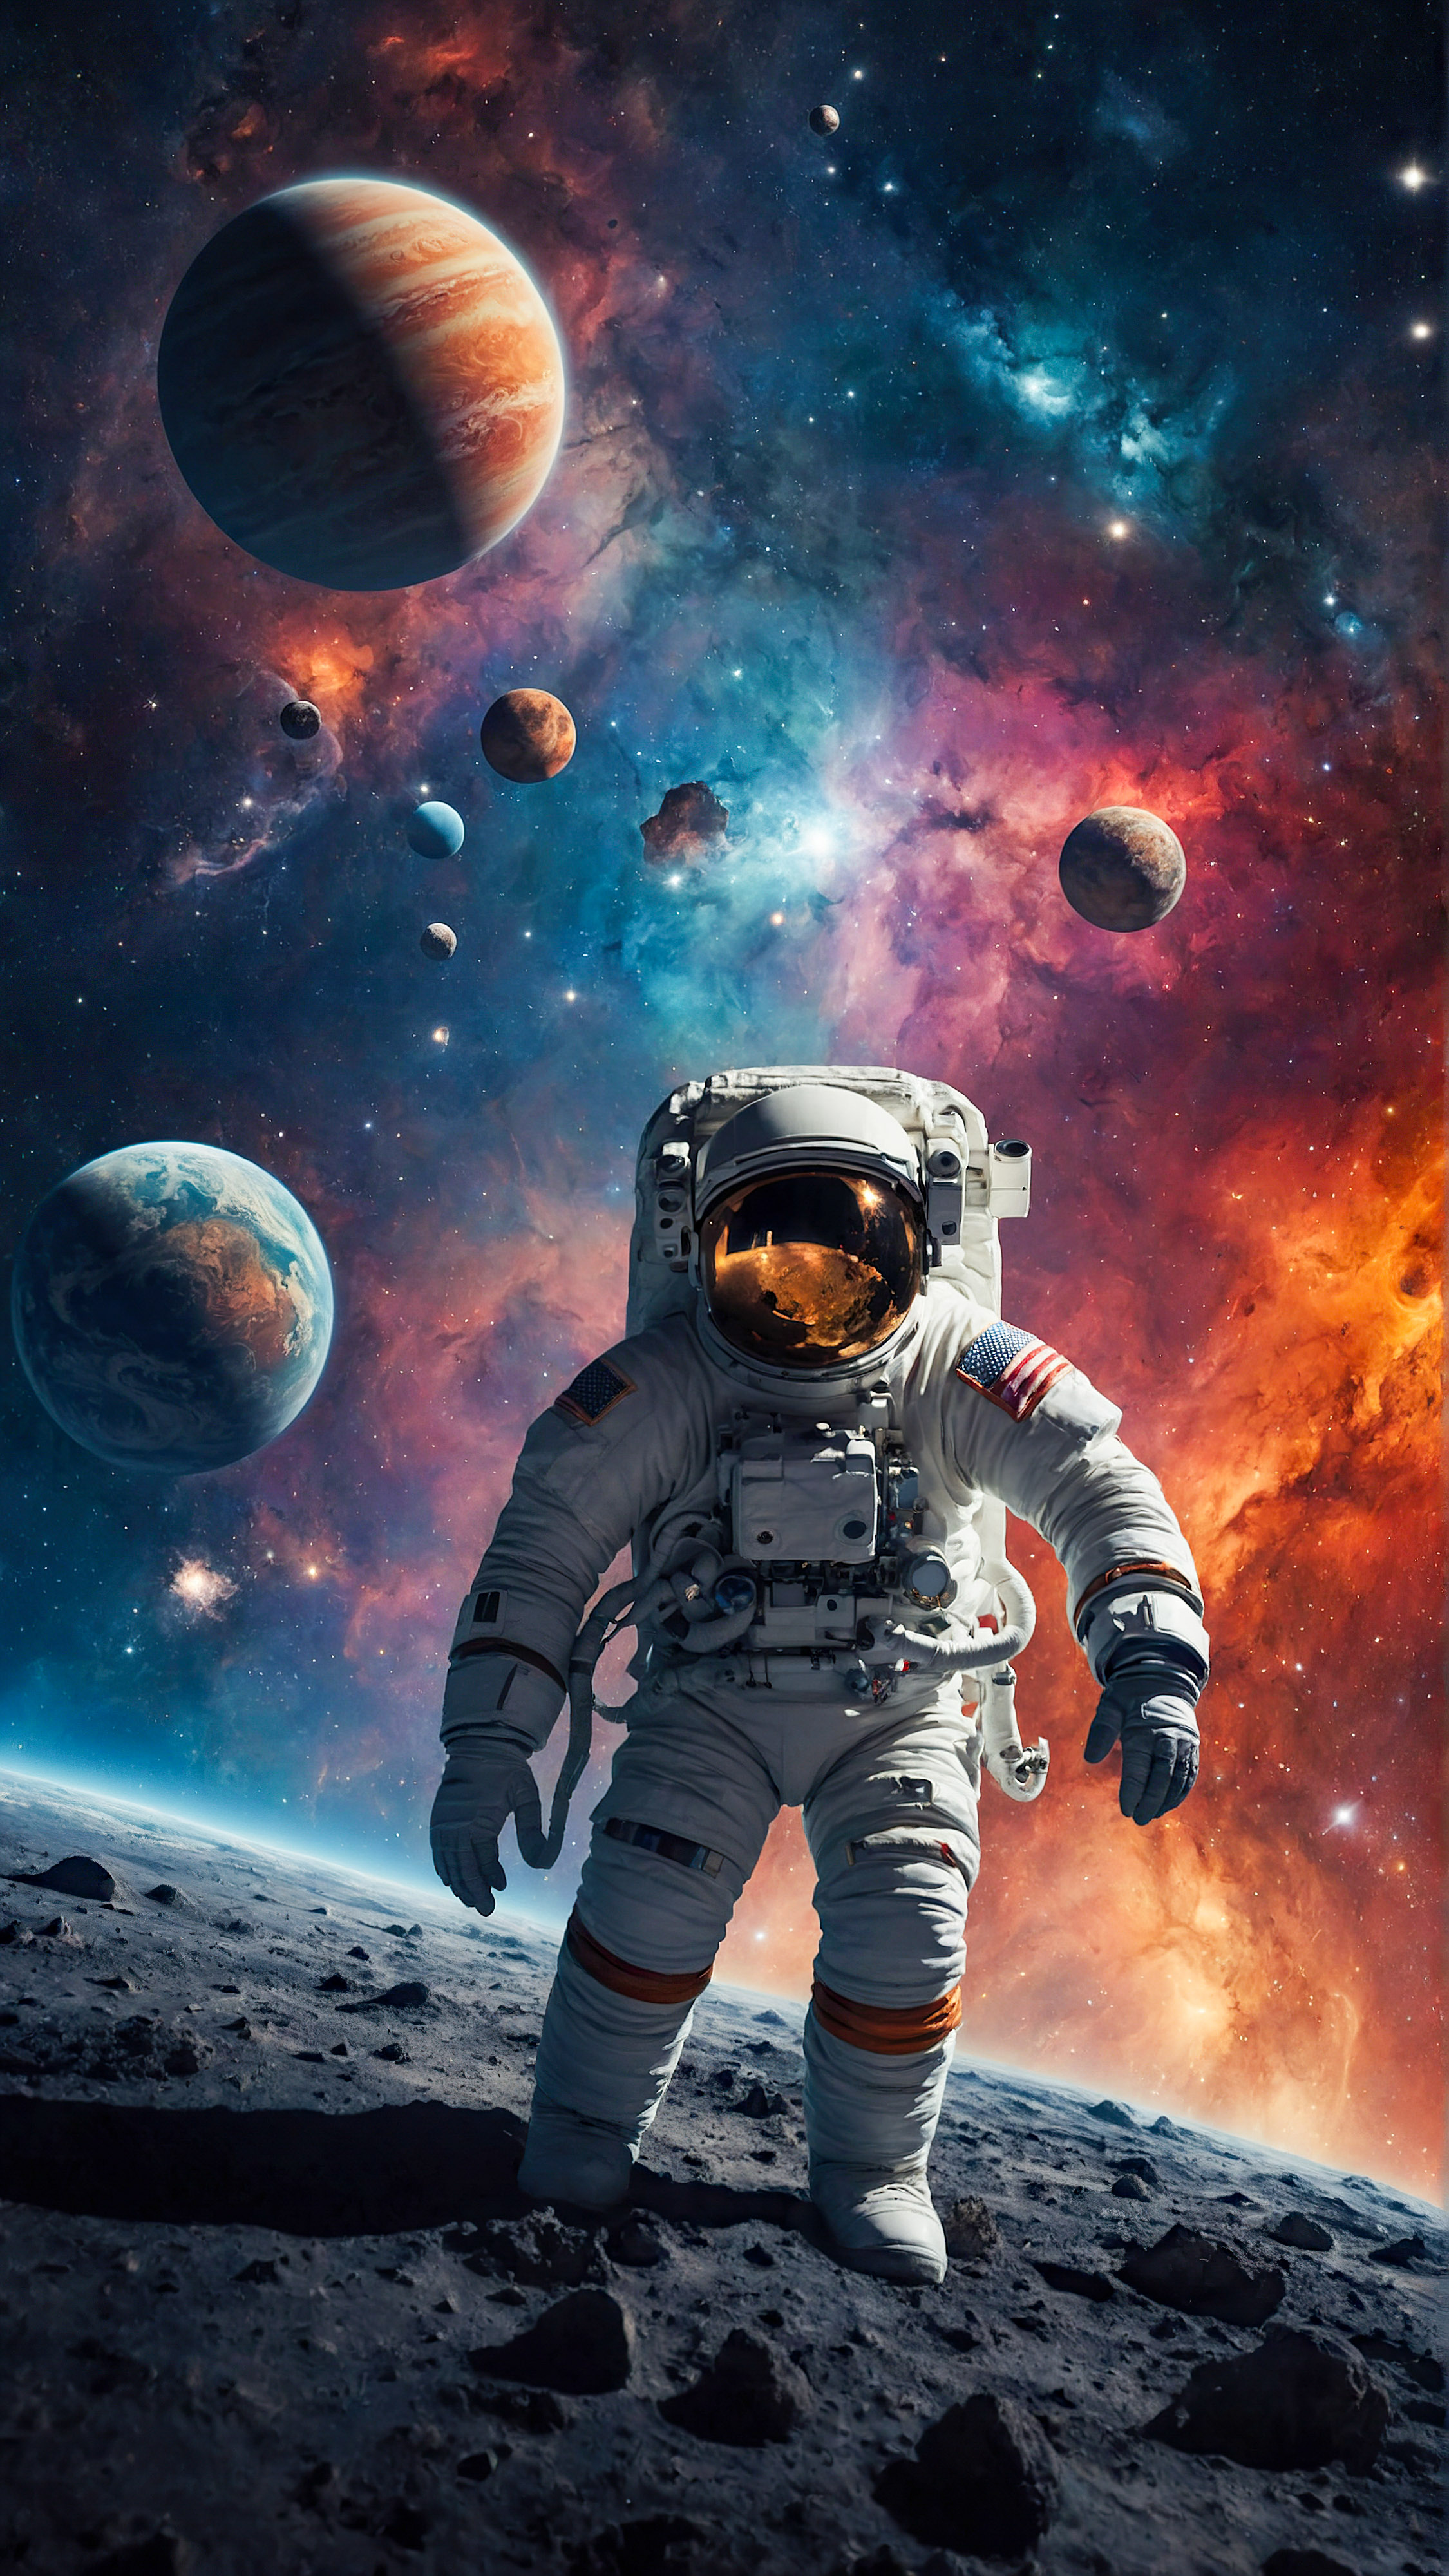 Get mesmerized with our iPhone space wallpaper featuring an astronaut surrounded by colorful celestial elements including various planets, stars, and a comet against a starry background, turning your screen into a cosmic journey.